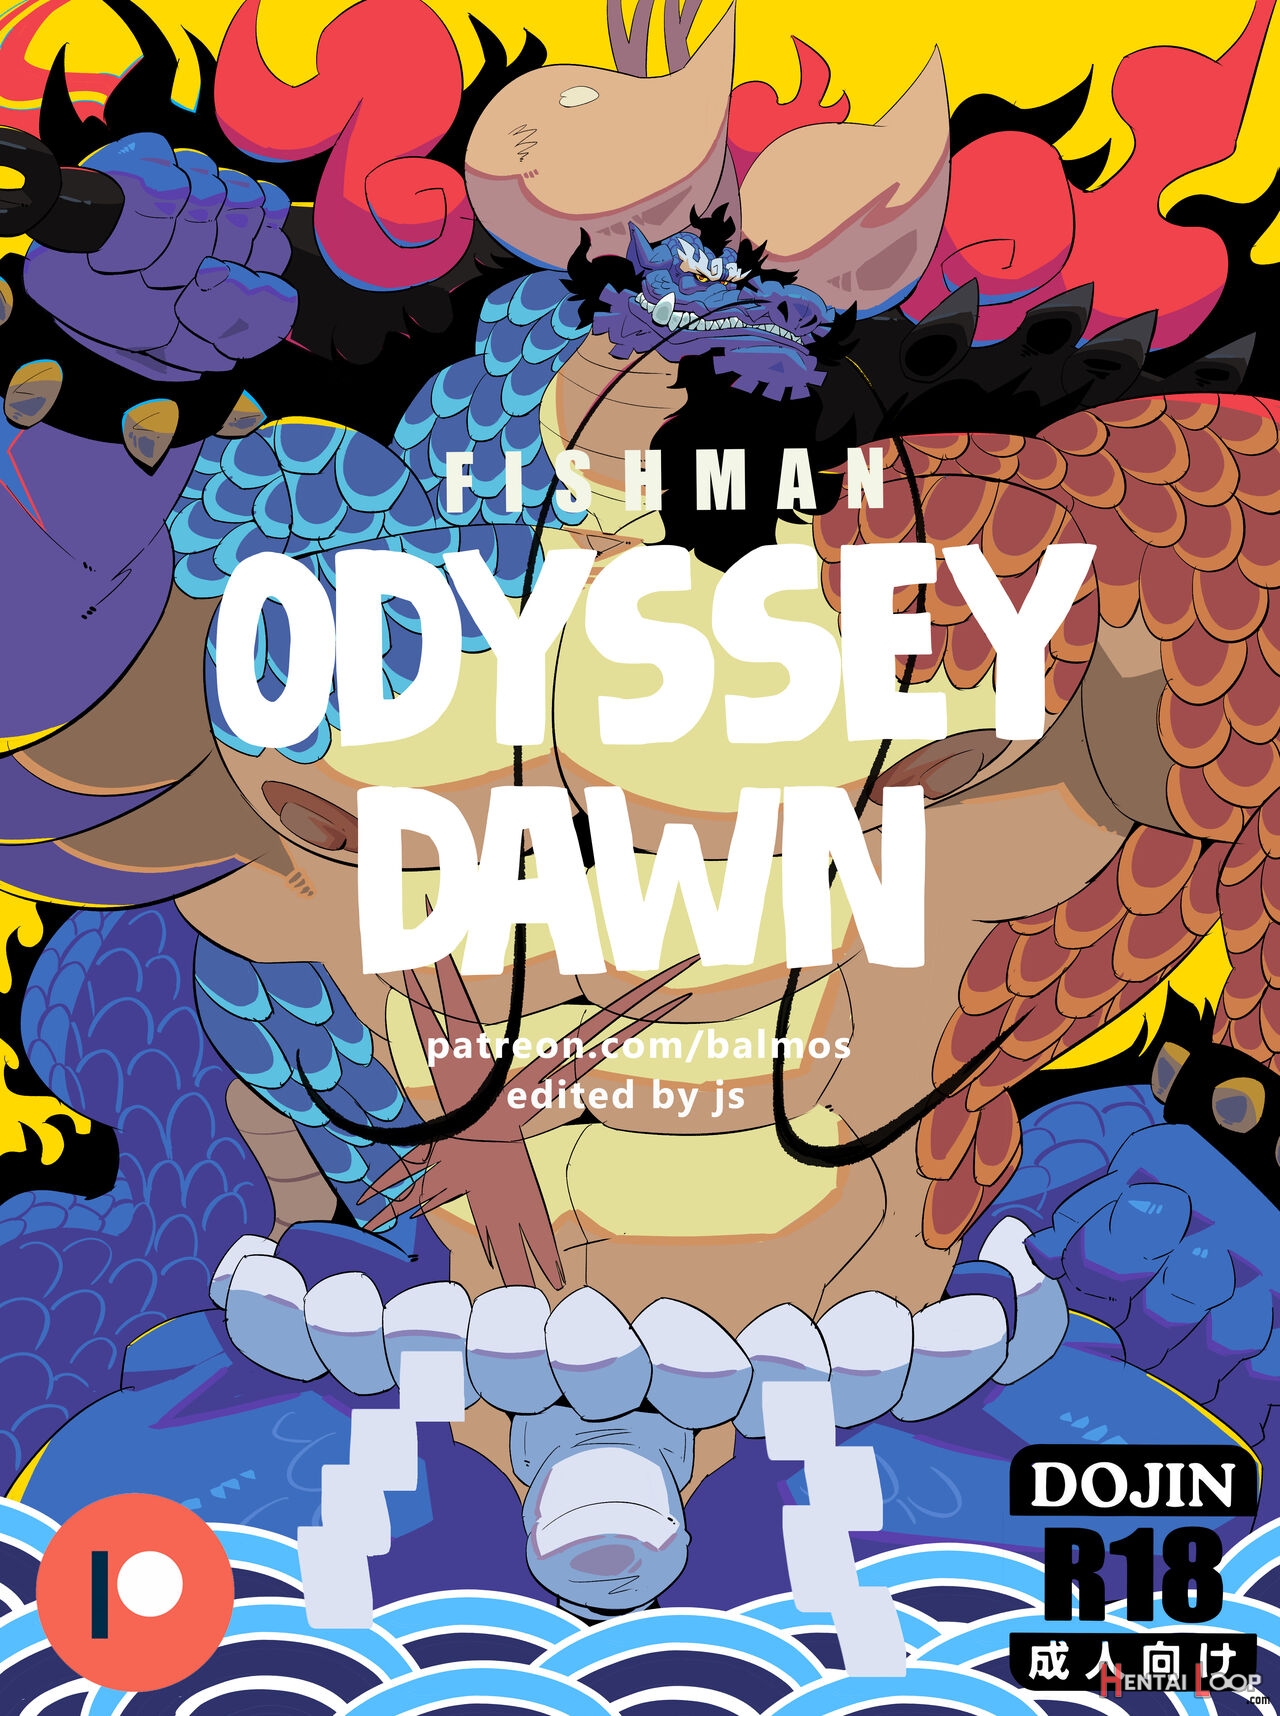 Fishman Odyssey (by Balmos) - Hentai doujinshi for free at HentaiLoop